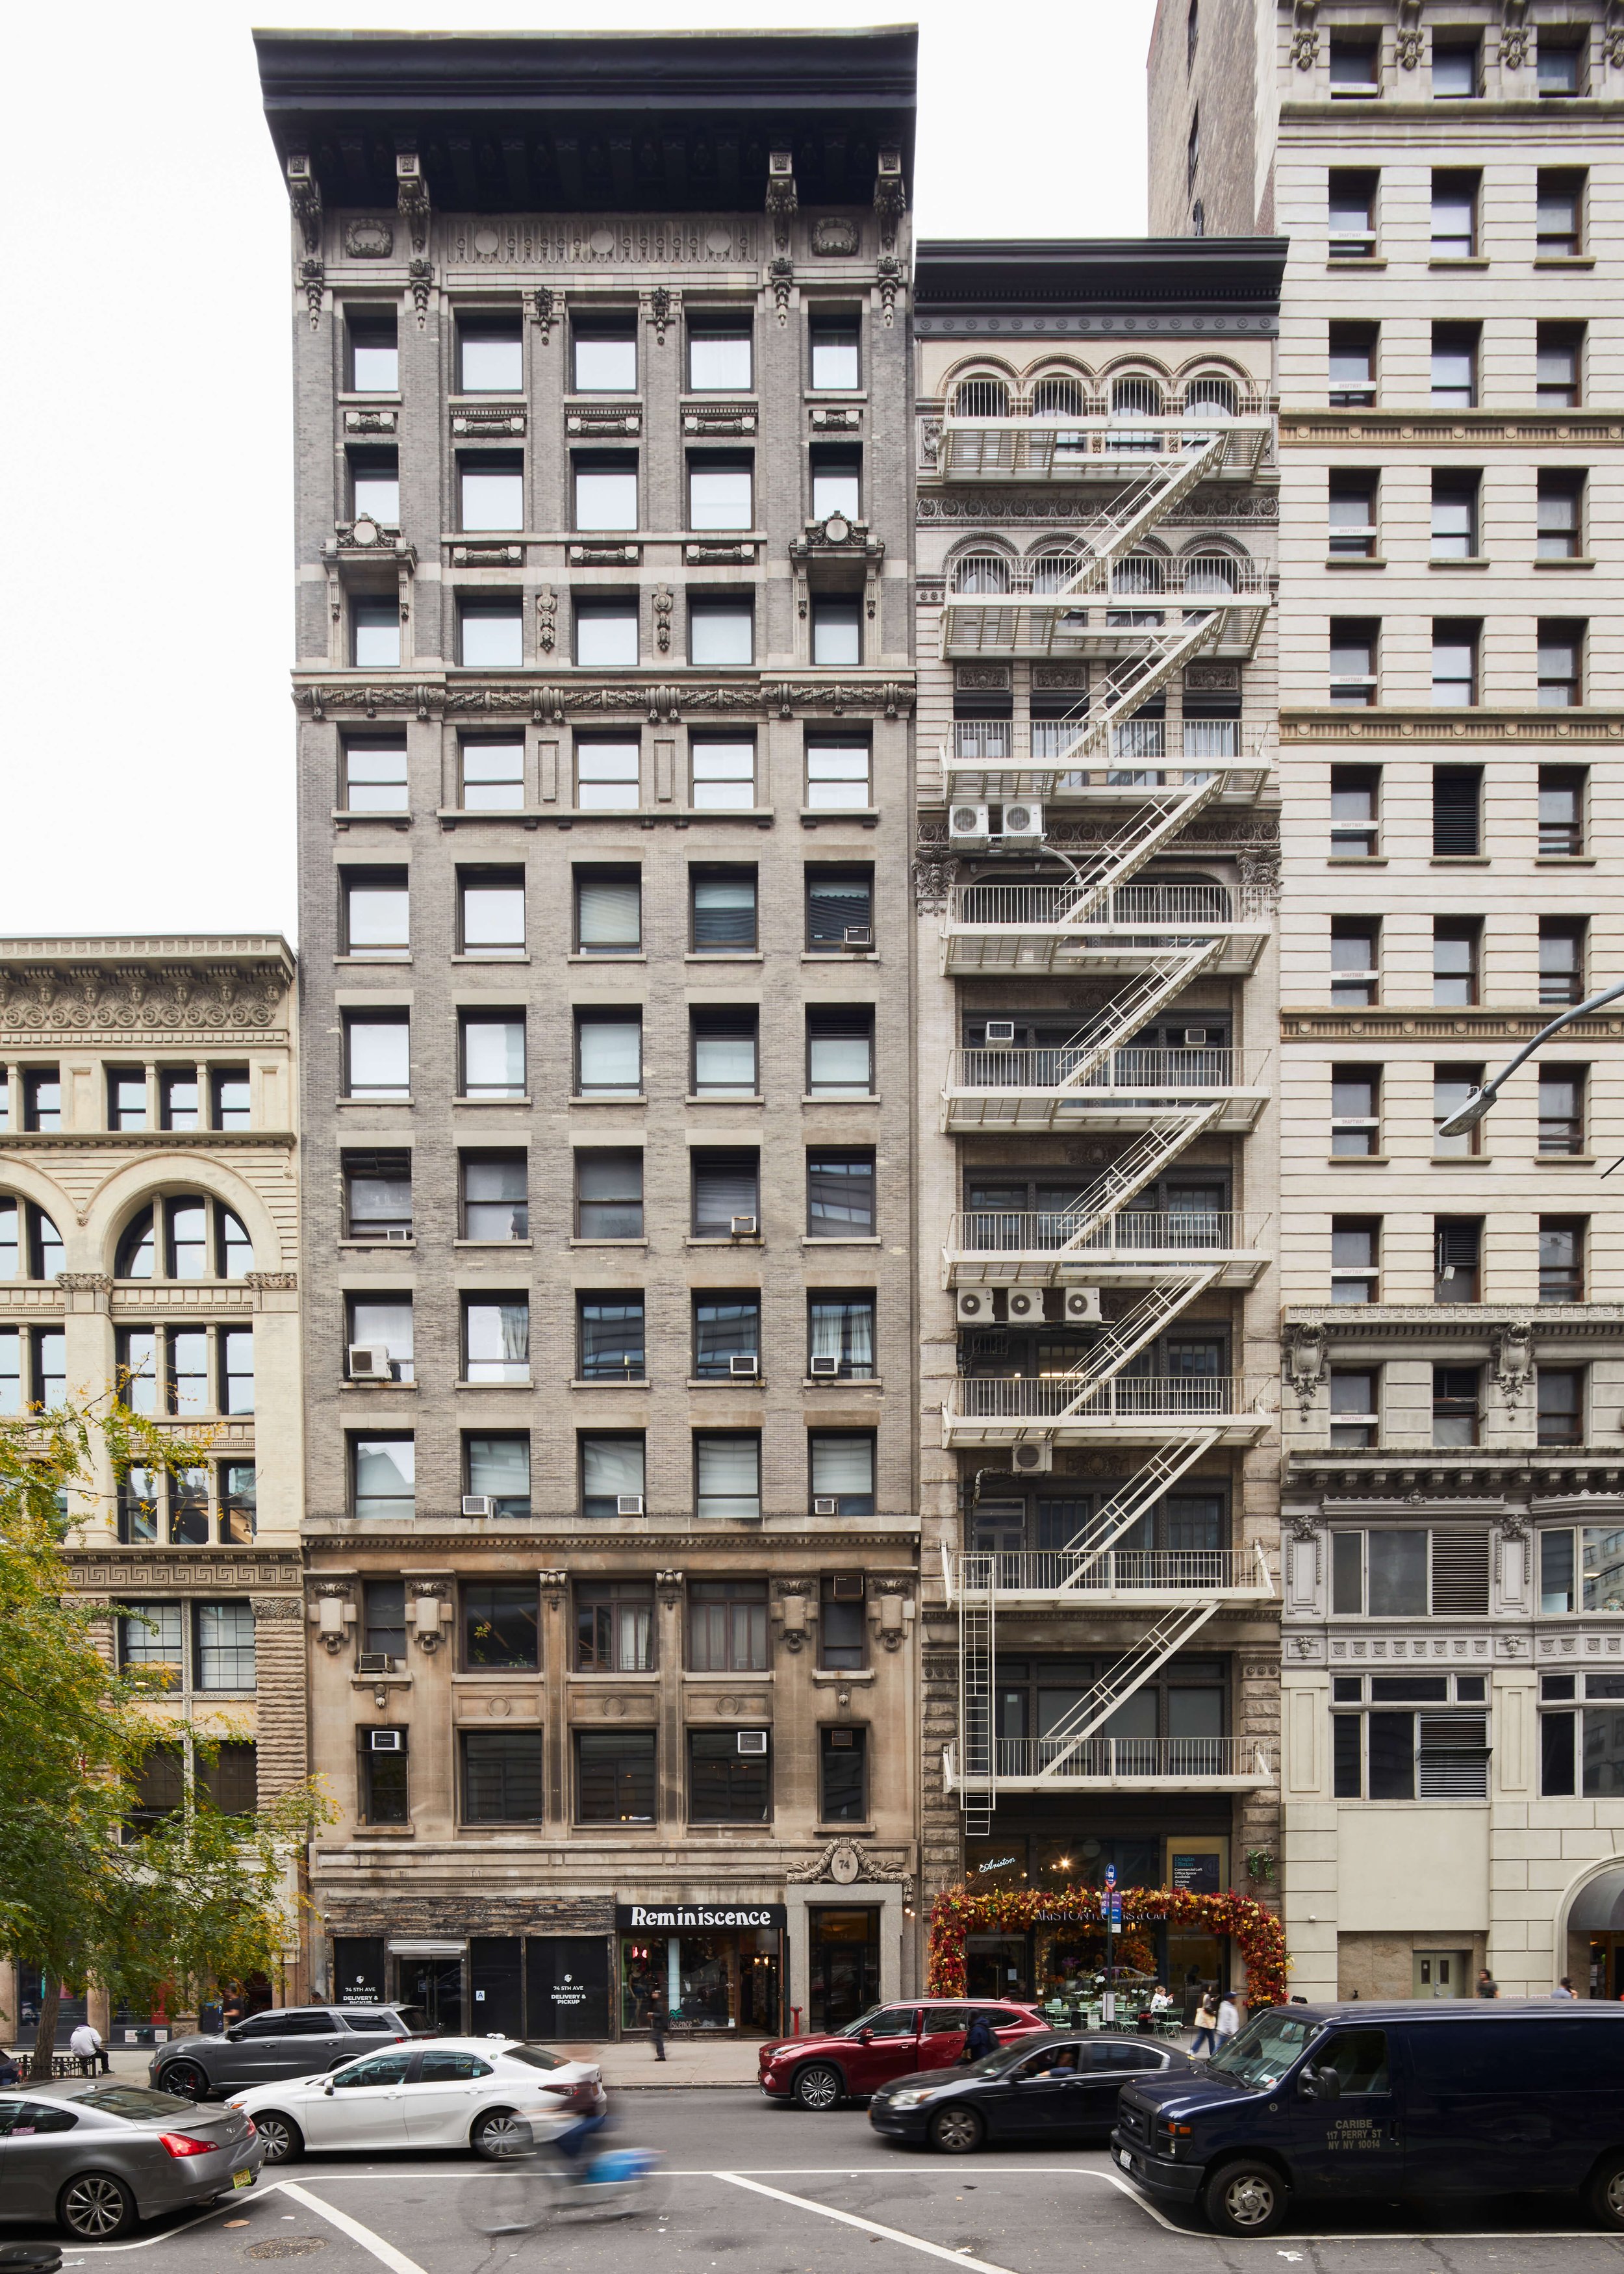  (l. to r.) 74-76 and 78 Fifth Avenue. The former is a 12-story loft building designed in 1910 by Maynicke &amp; Franke for Henry Corn with secessionist style motifs; it housed a noted venue for film showings, lectures, and other gatherings related t